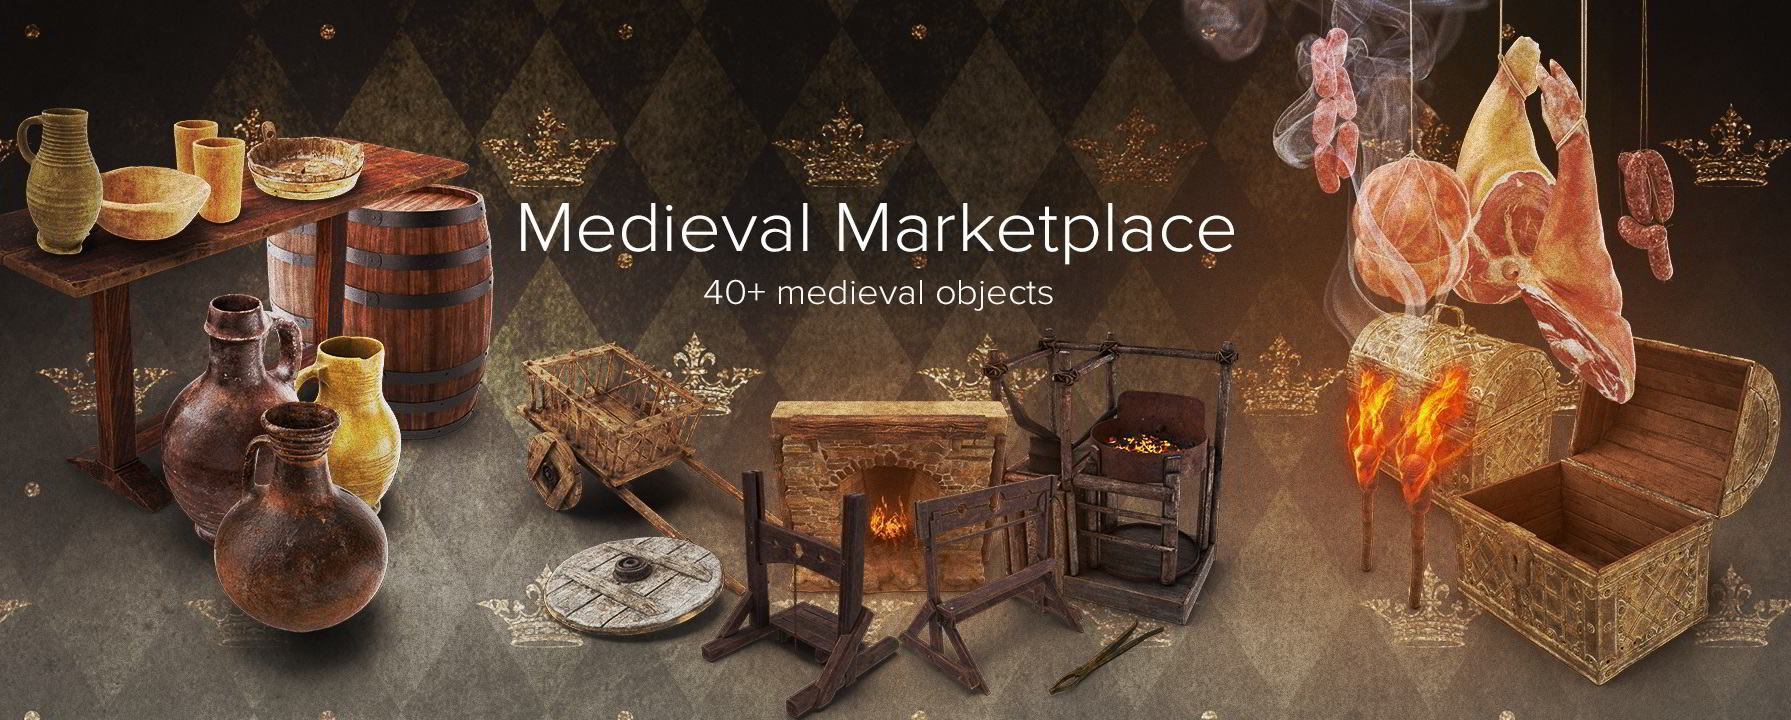 PixelSquid – Medieval Marketplace Collection free download